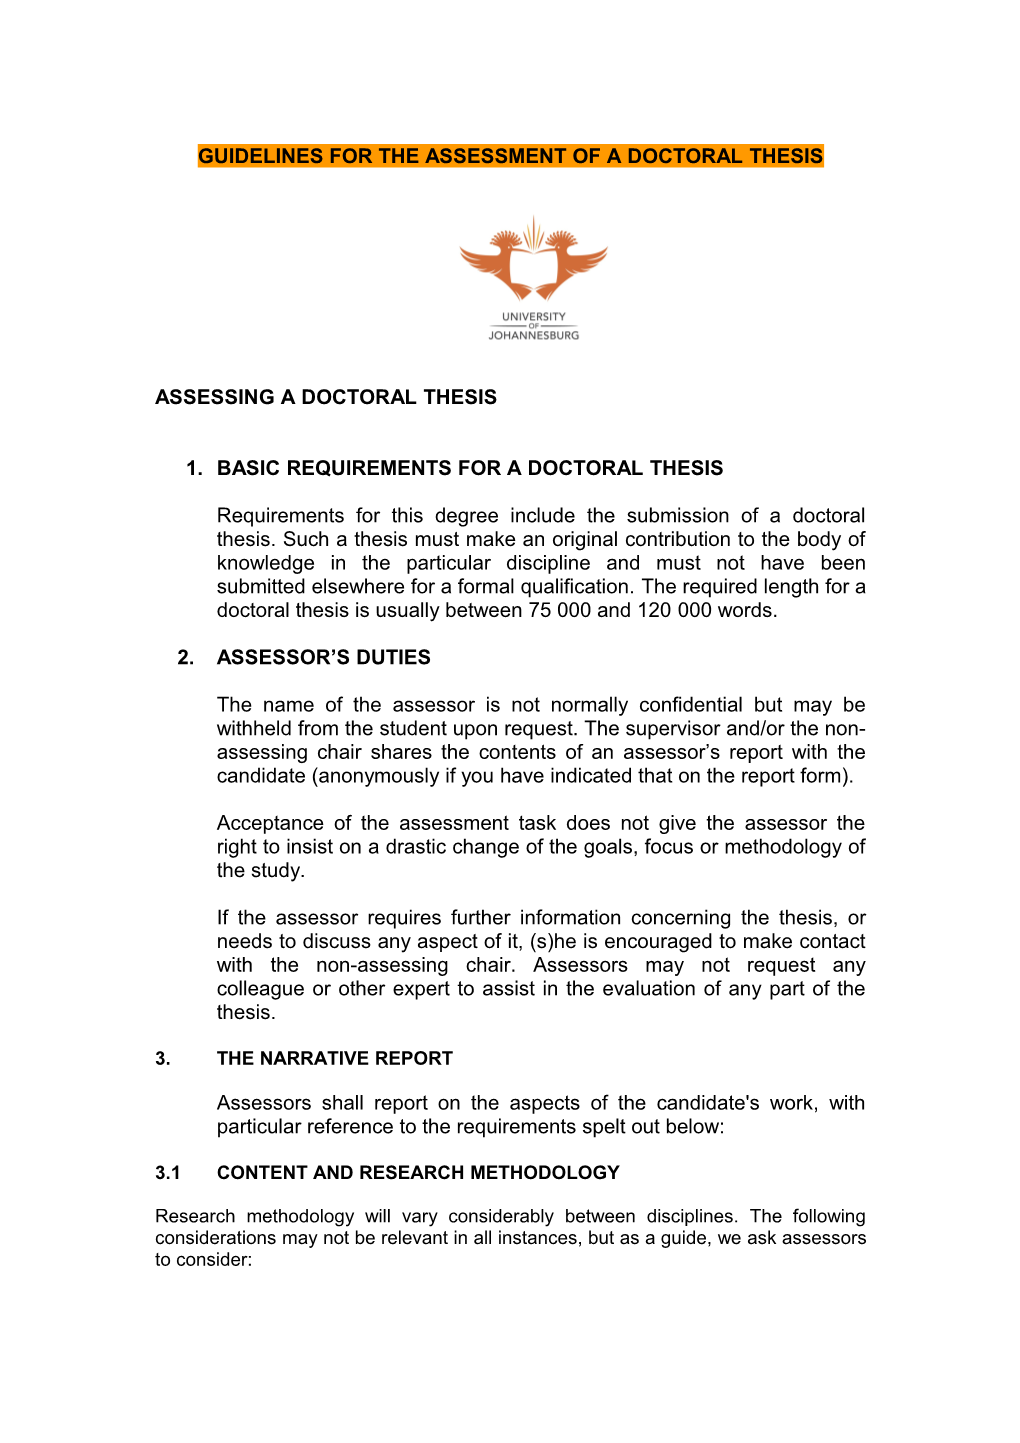 Guidelines for the Assessment of a Doctoral Thesis 2014